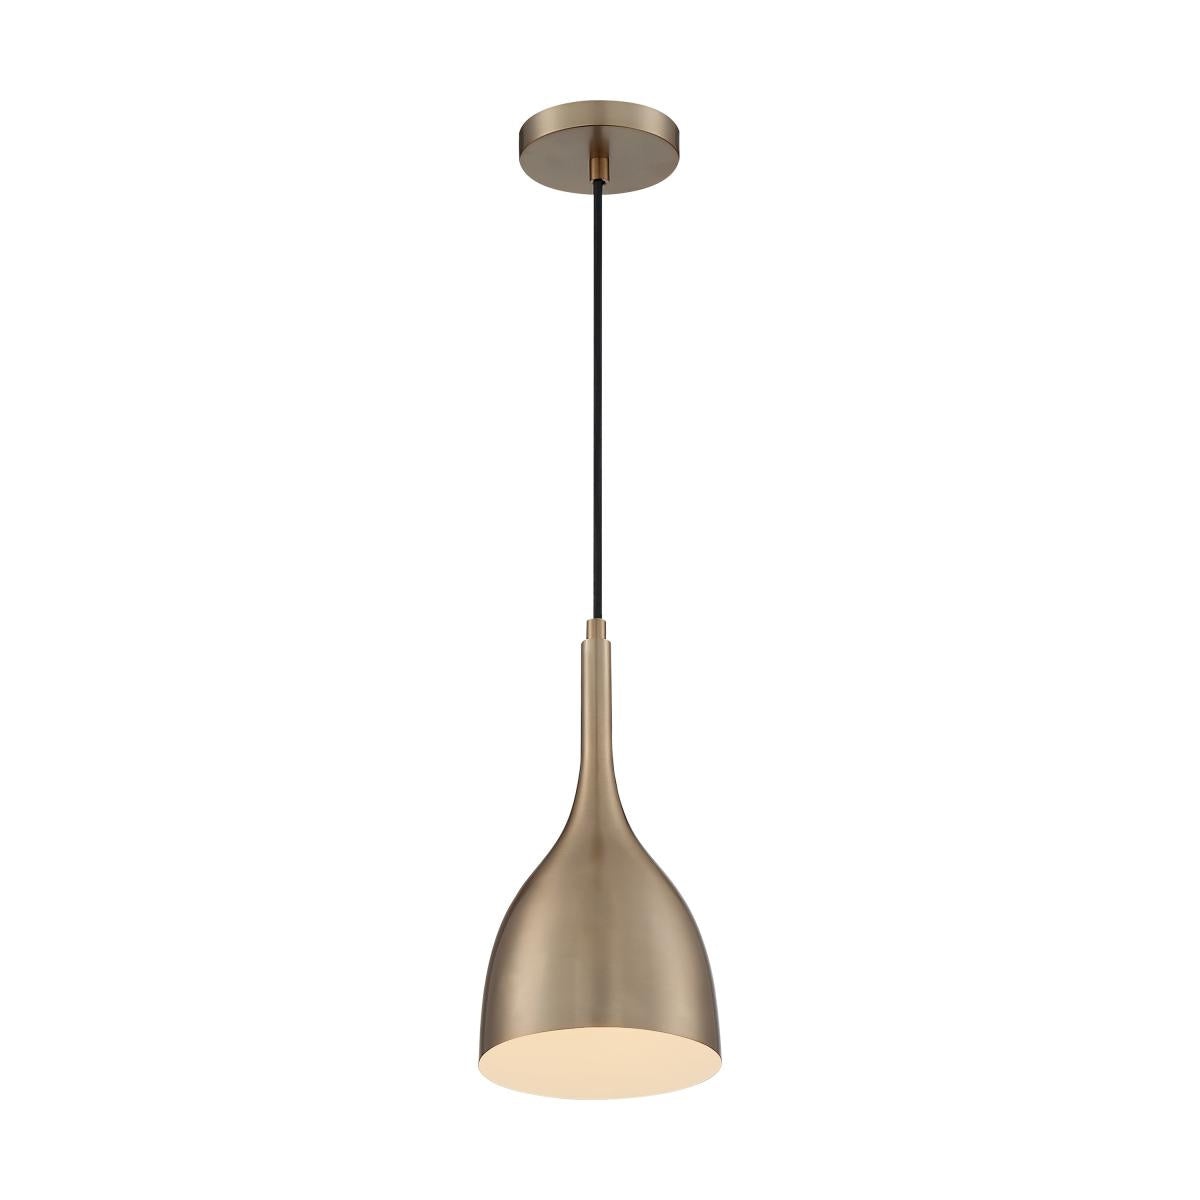 Bellcap 1 Light Pendant with Burnished Brass Finish